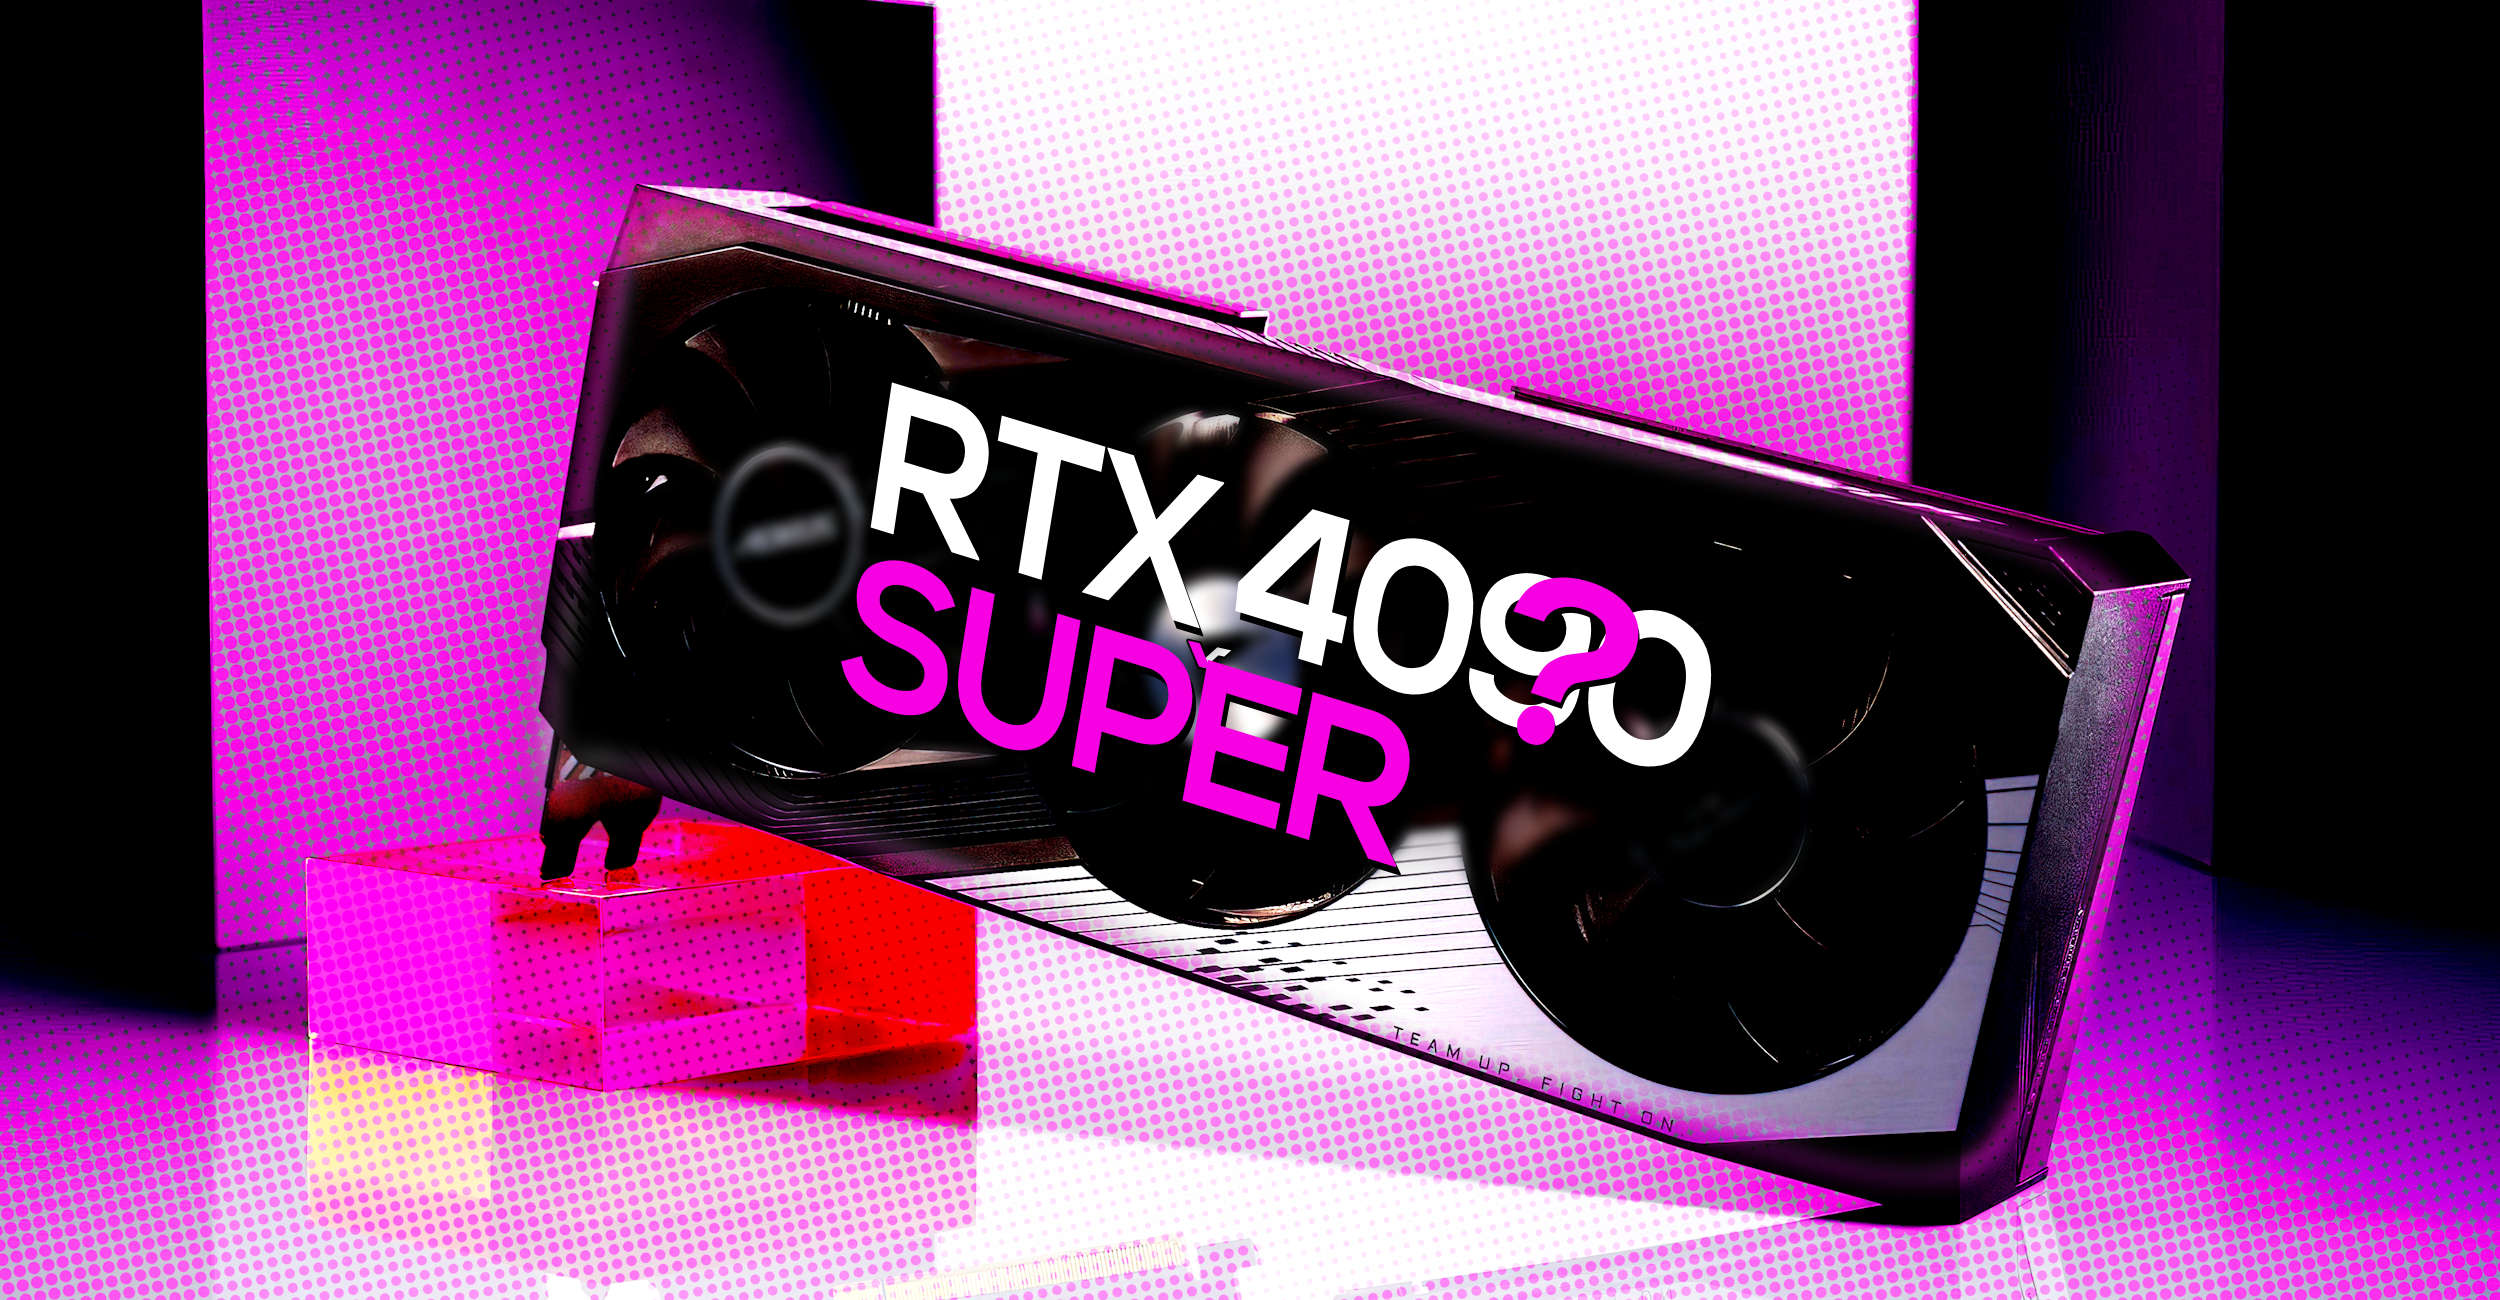 Updated: GeForce RTX 40 SUPER launch scheduled for January 17, 24